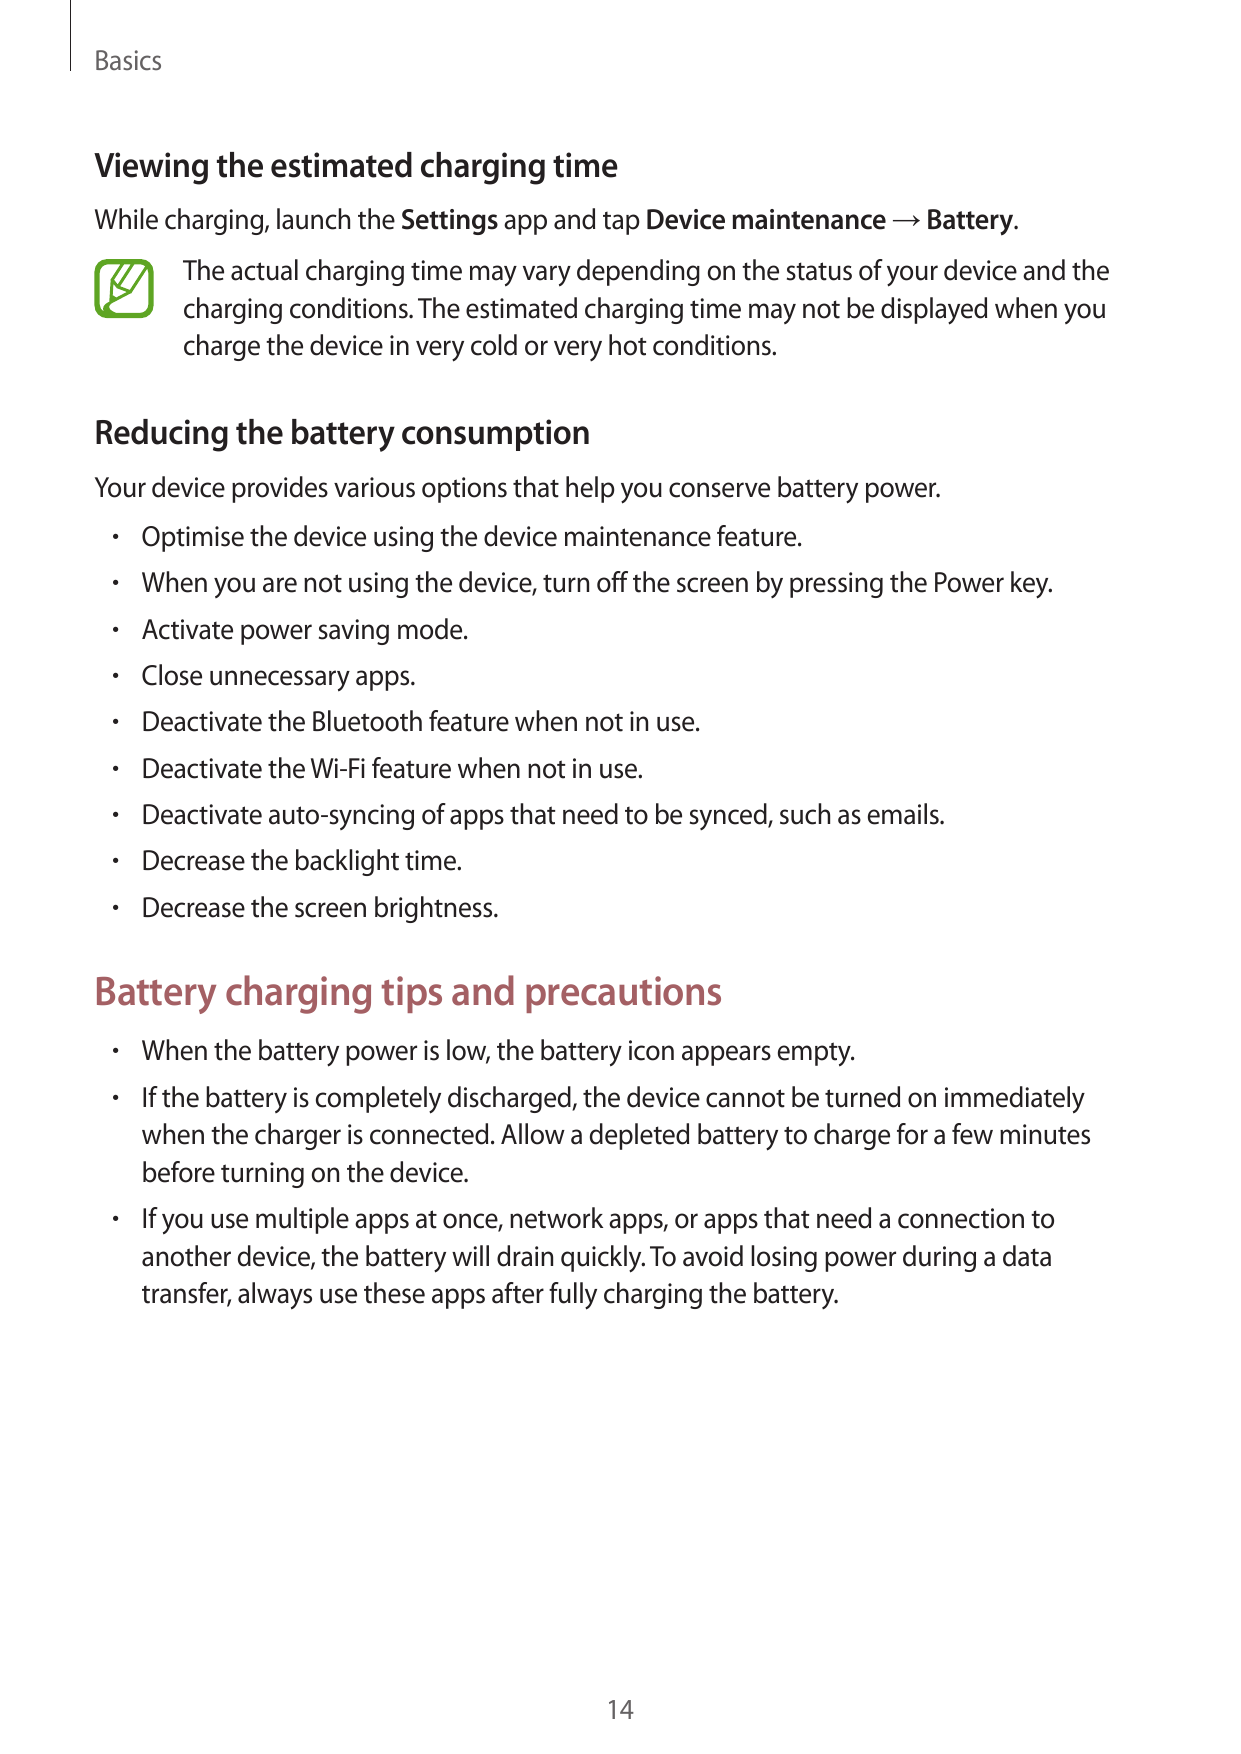 BasicsViewing the estimated charging timeWhile charging, launch the Settings app and tap Device maintenance → Battery.The actual